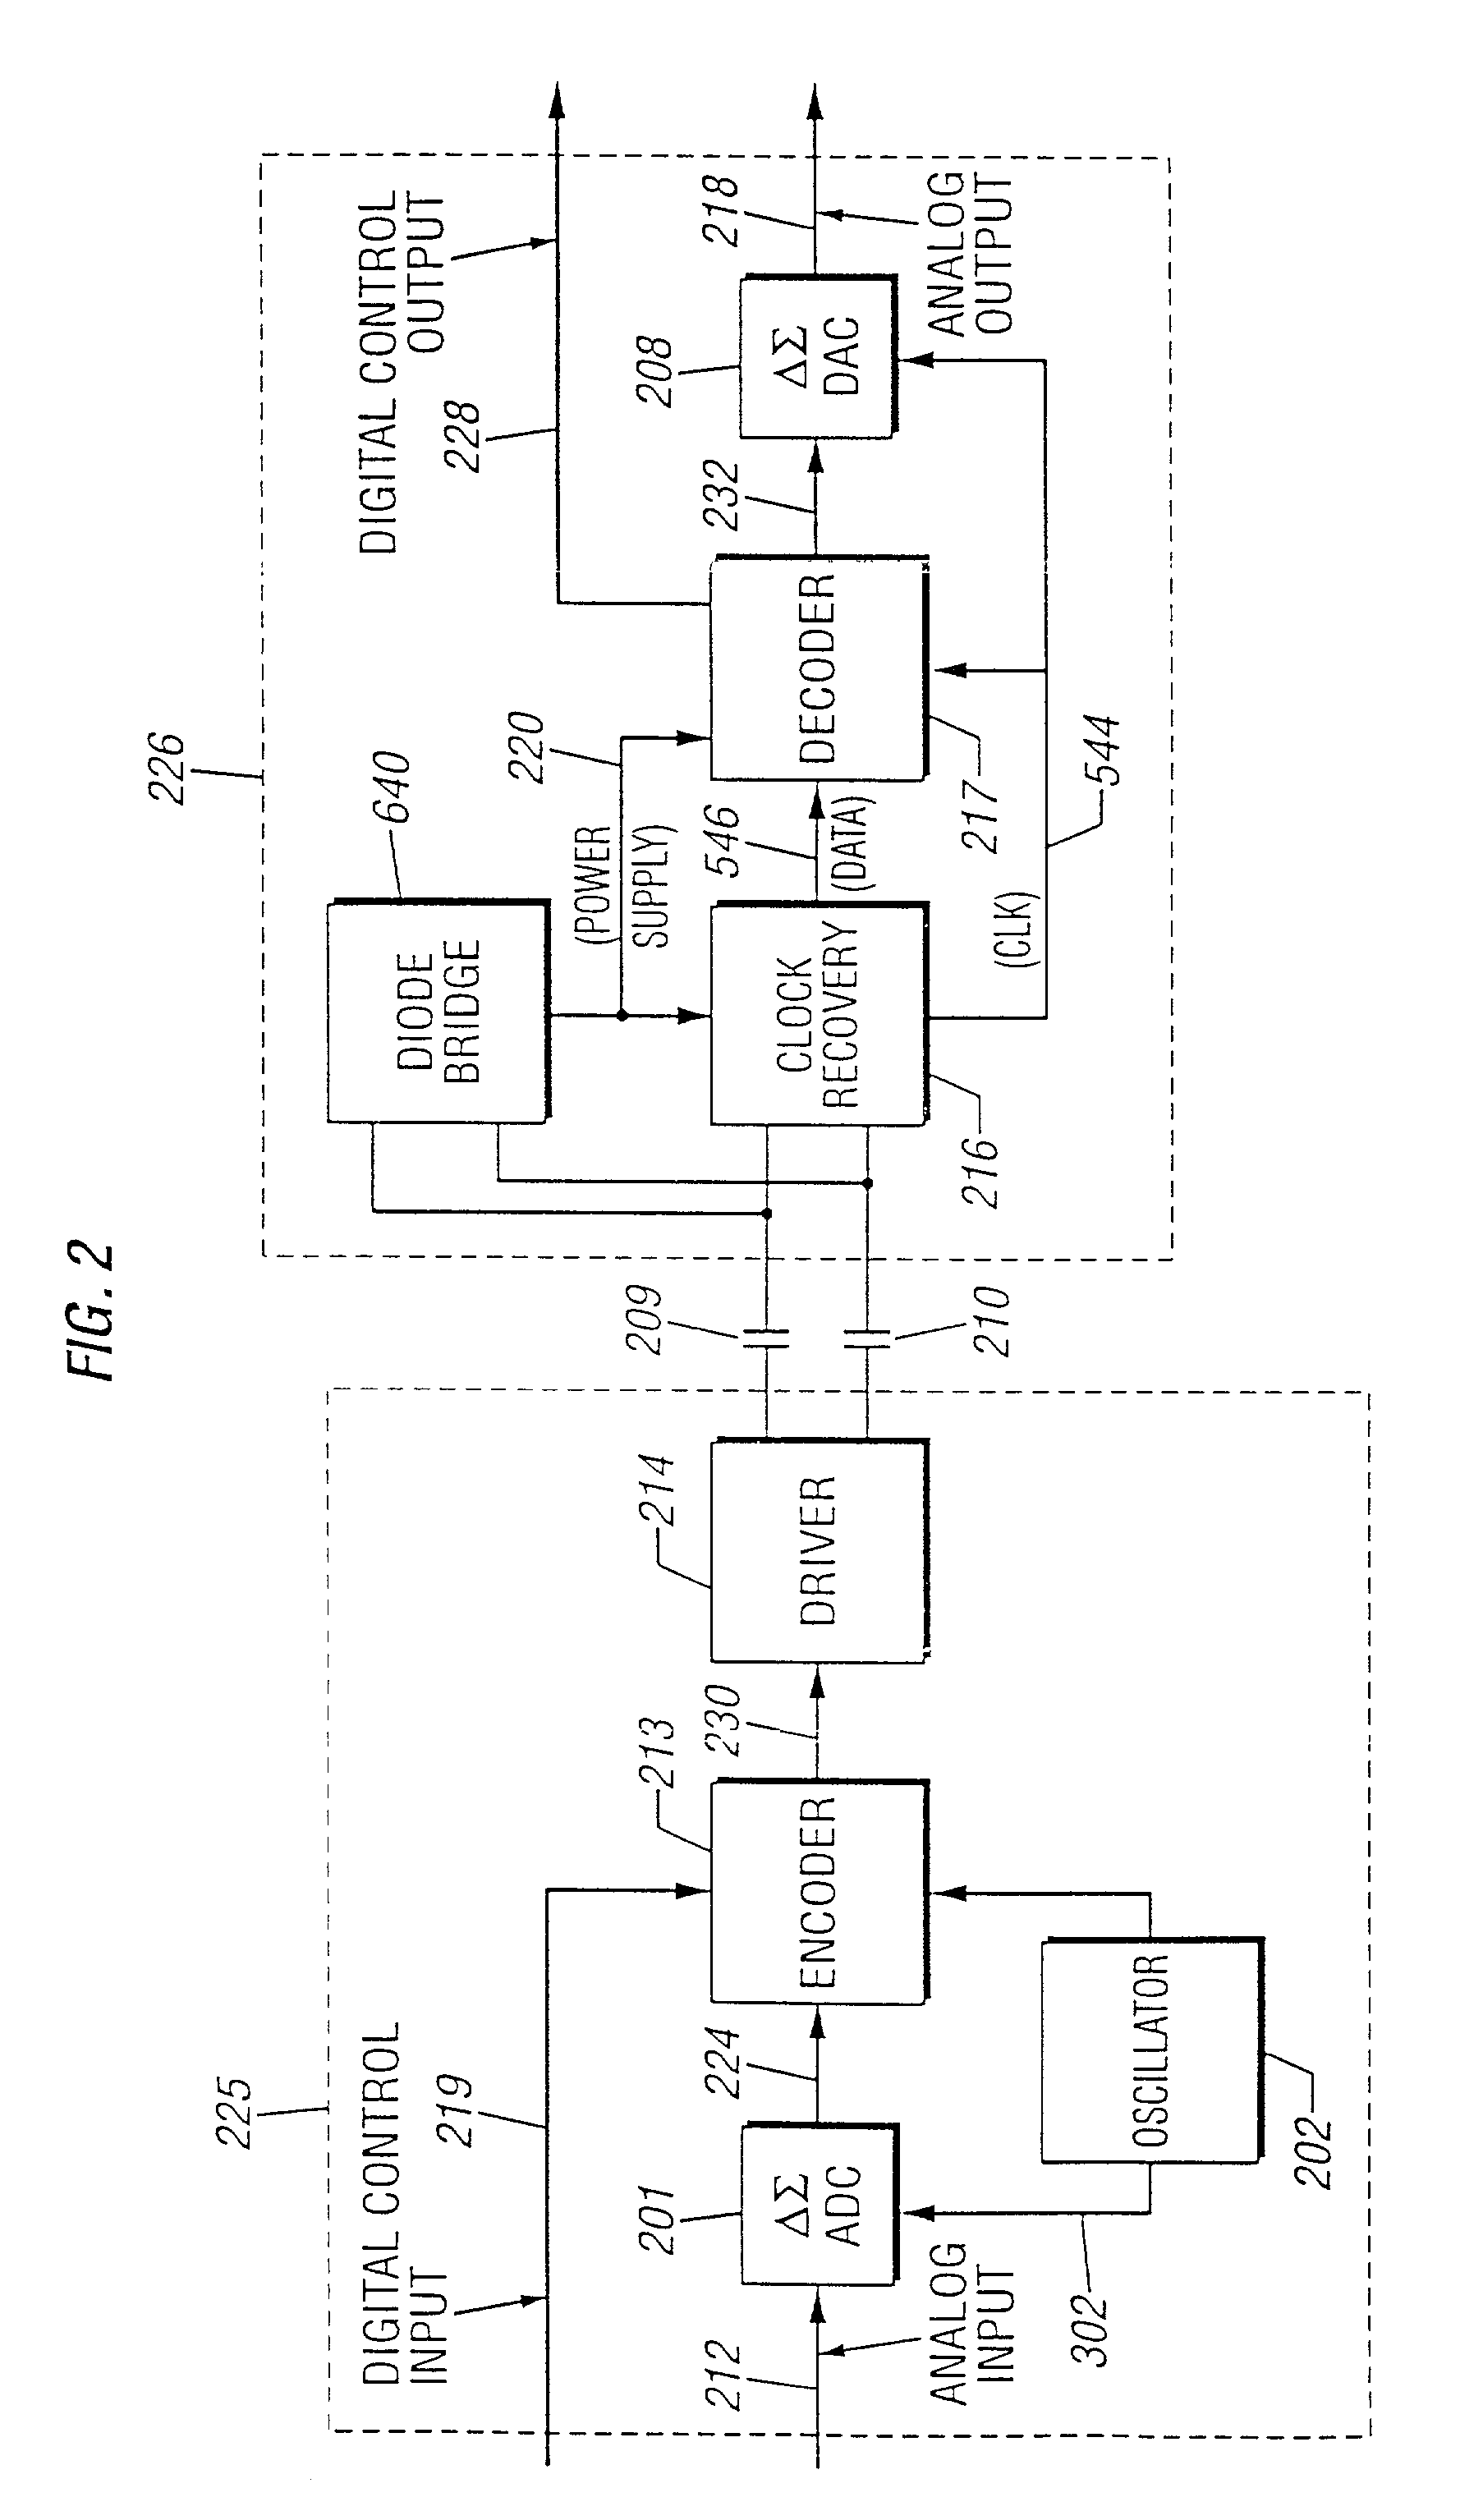 Digital isolation system with hybrid circuit in ADC calibration loop